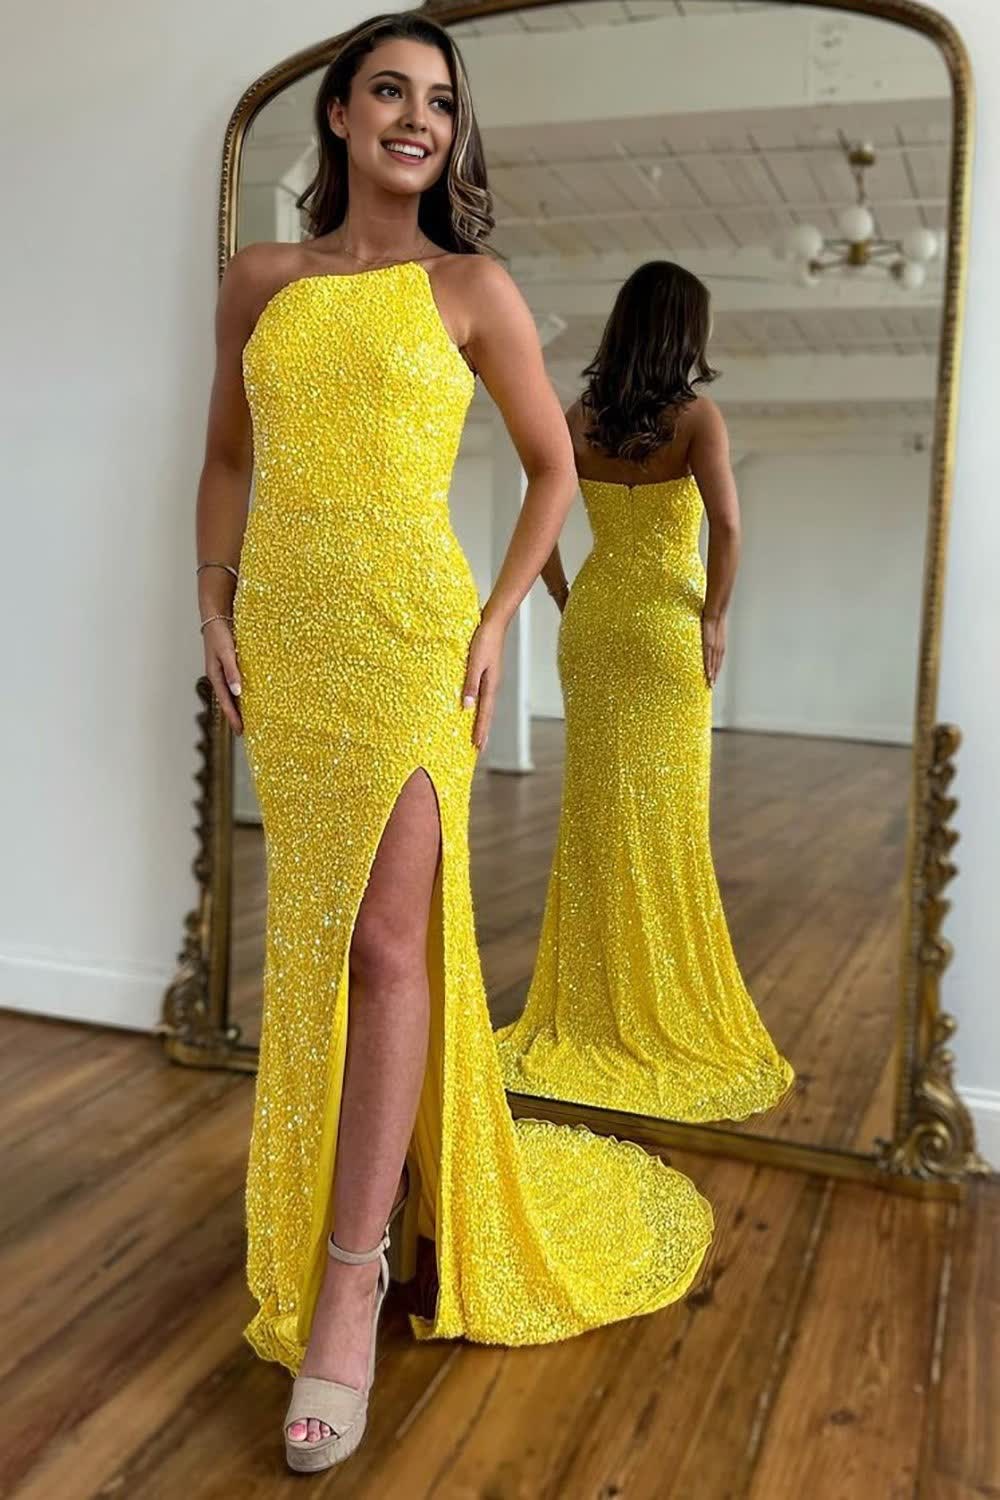 Sparkly Yellow Detachable Straps Mermaid Sequins Corset Prom Dress with Slit Gowns, Sparkly Yellow Detachable Straps Mermaid Sequins Prom Dress with Slit